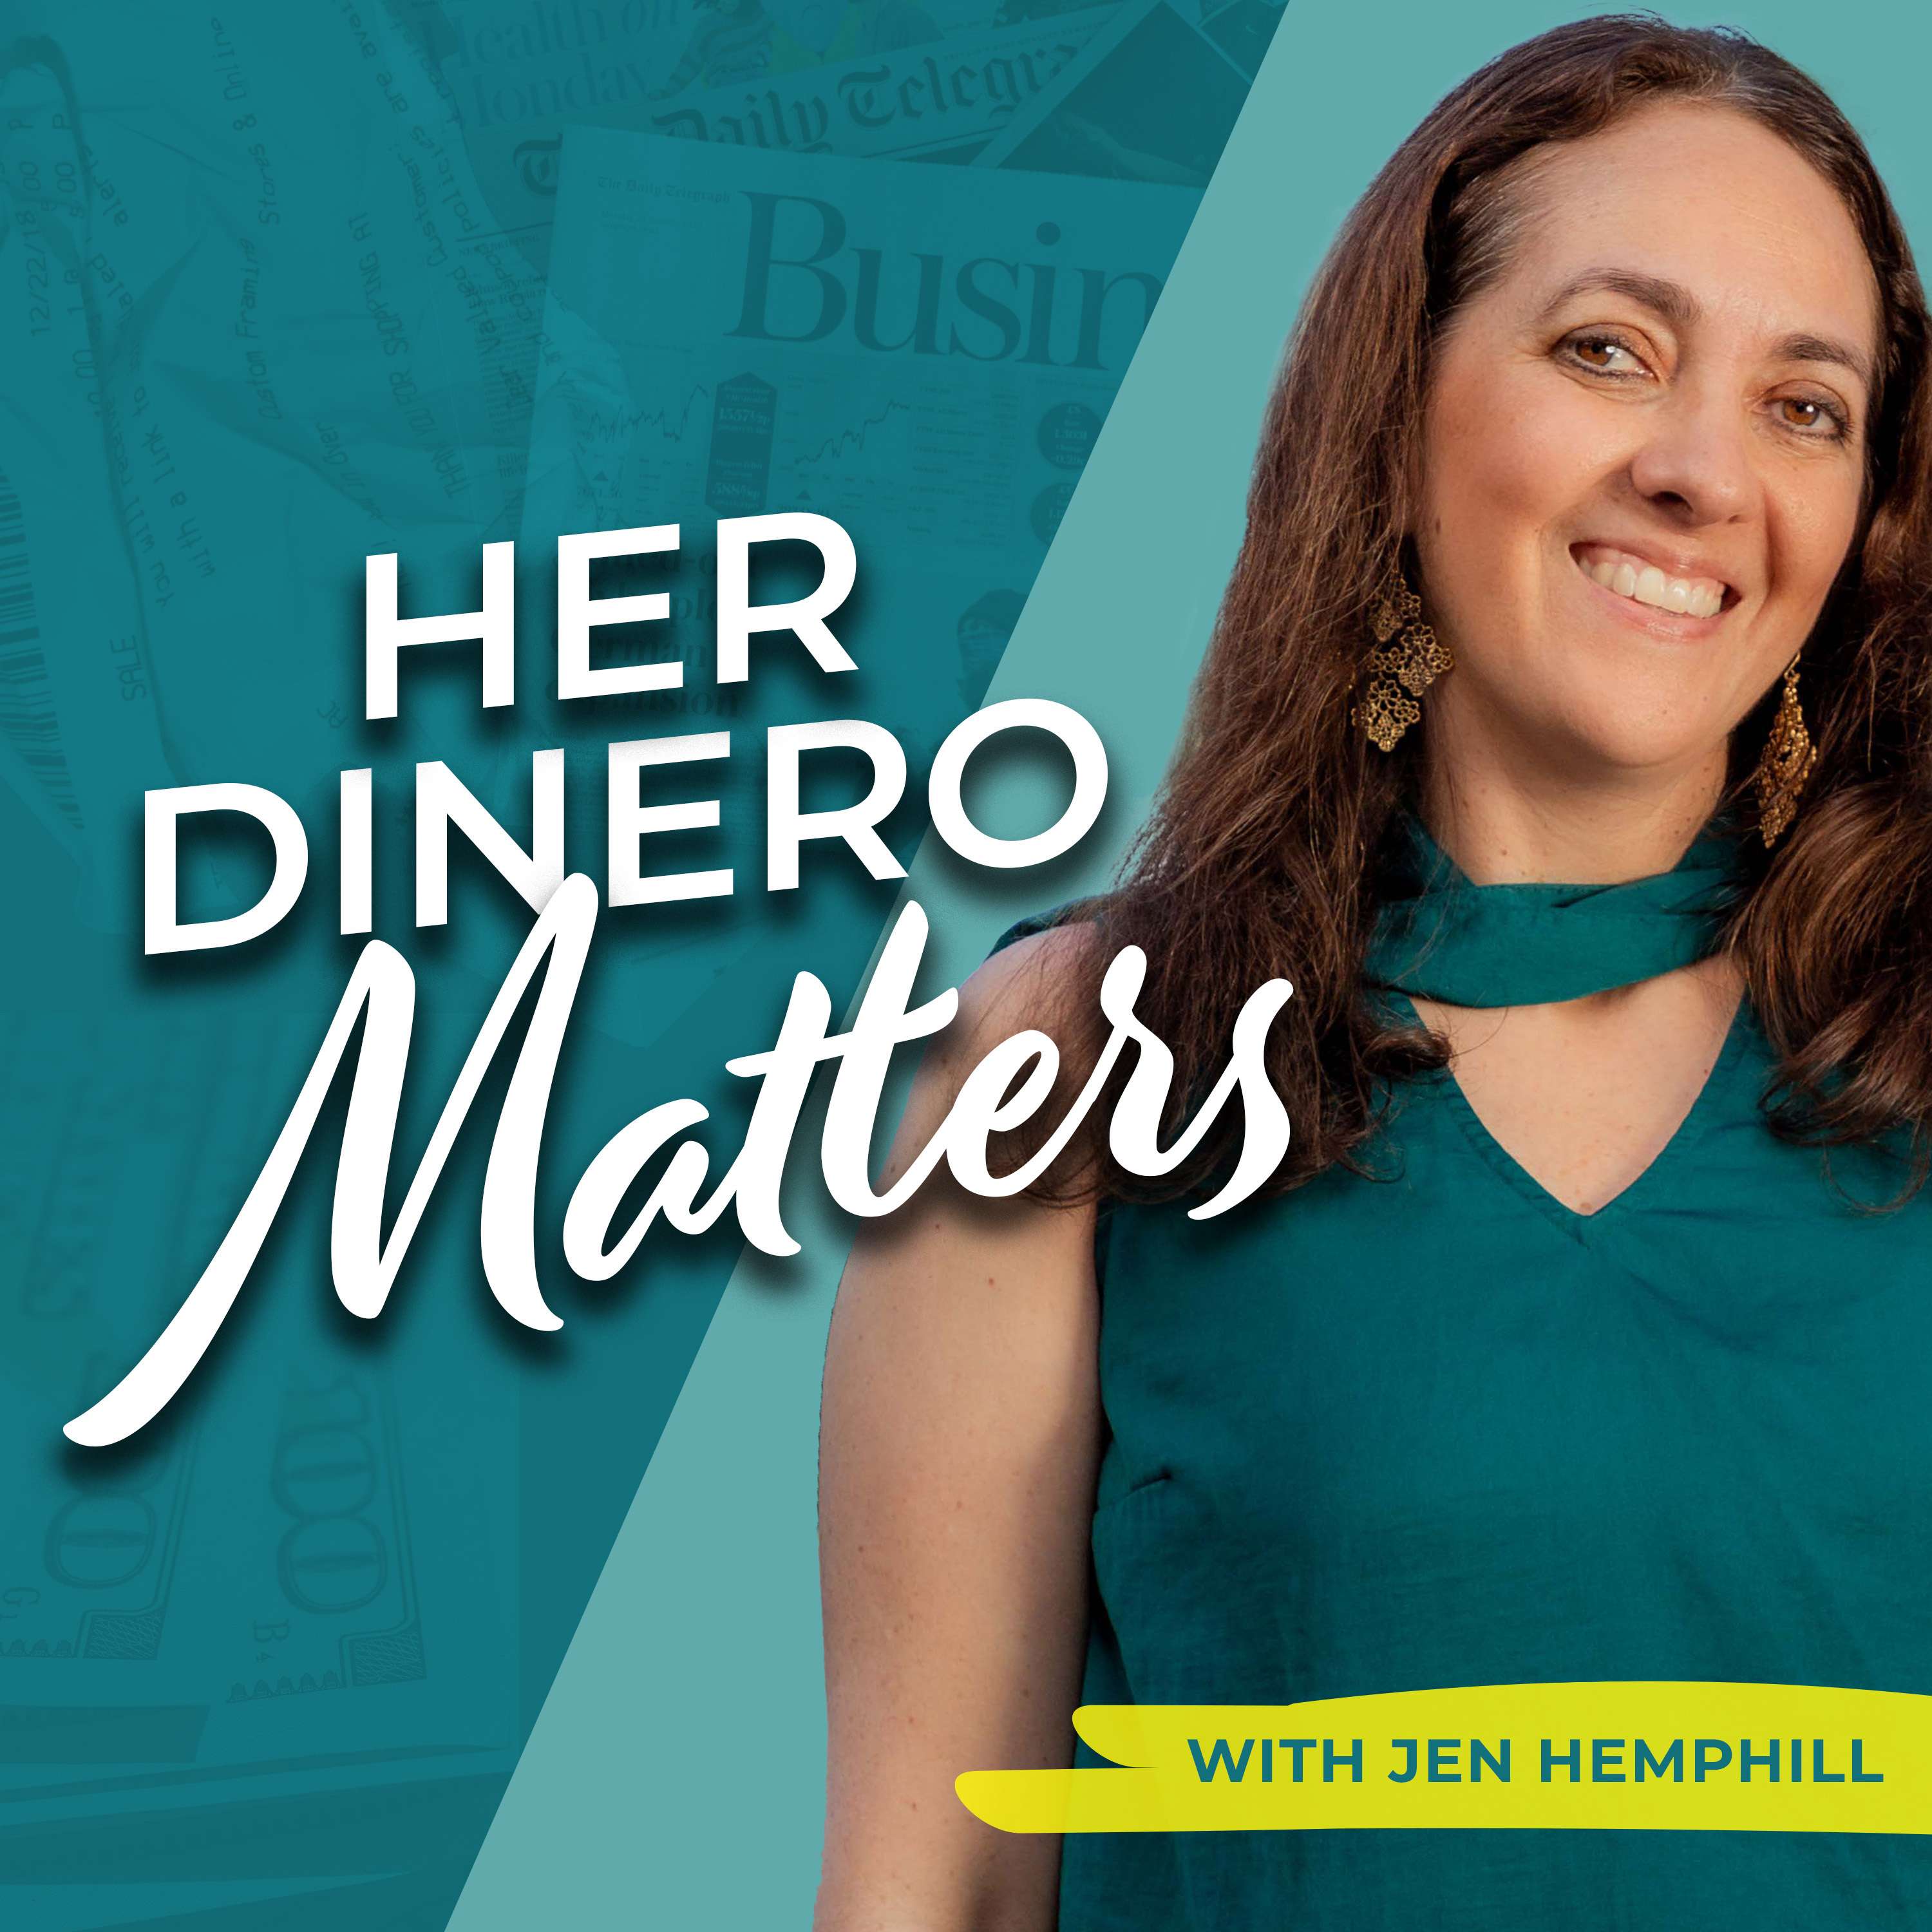 Her Dinero Matters podcast show image